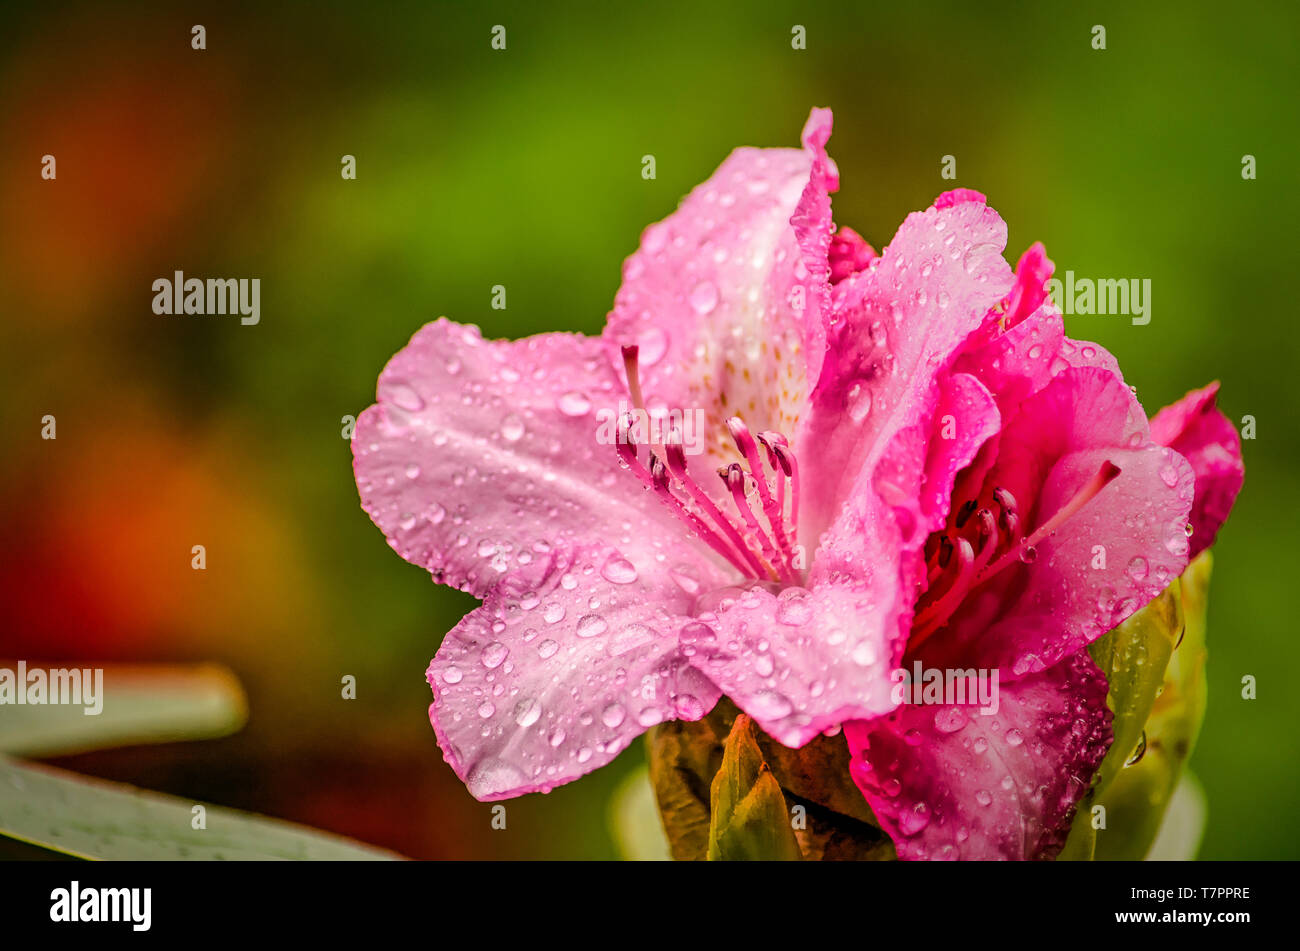 Close-up of the reddish purple flower of a rhododendron with drops of water from a recent rainfall Stock Photo